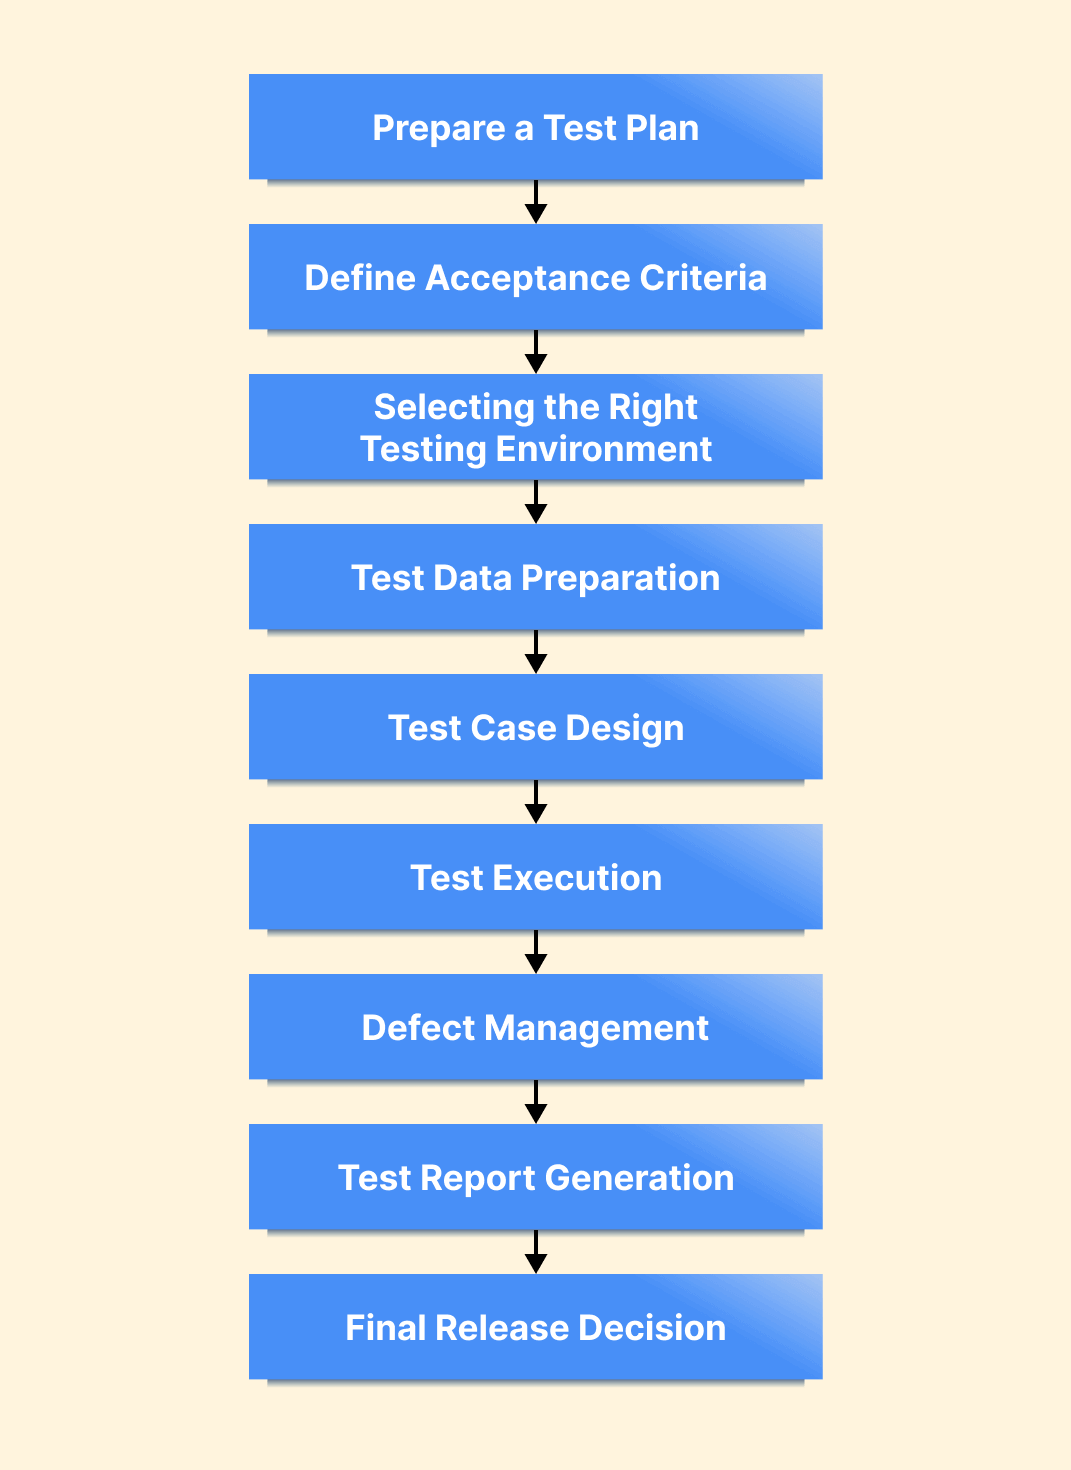 Steps to perform Release Testing